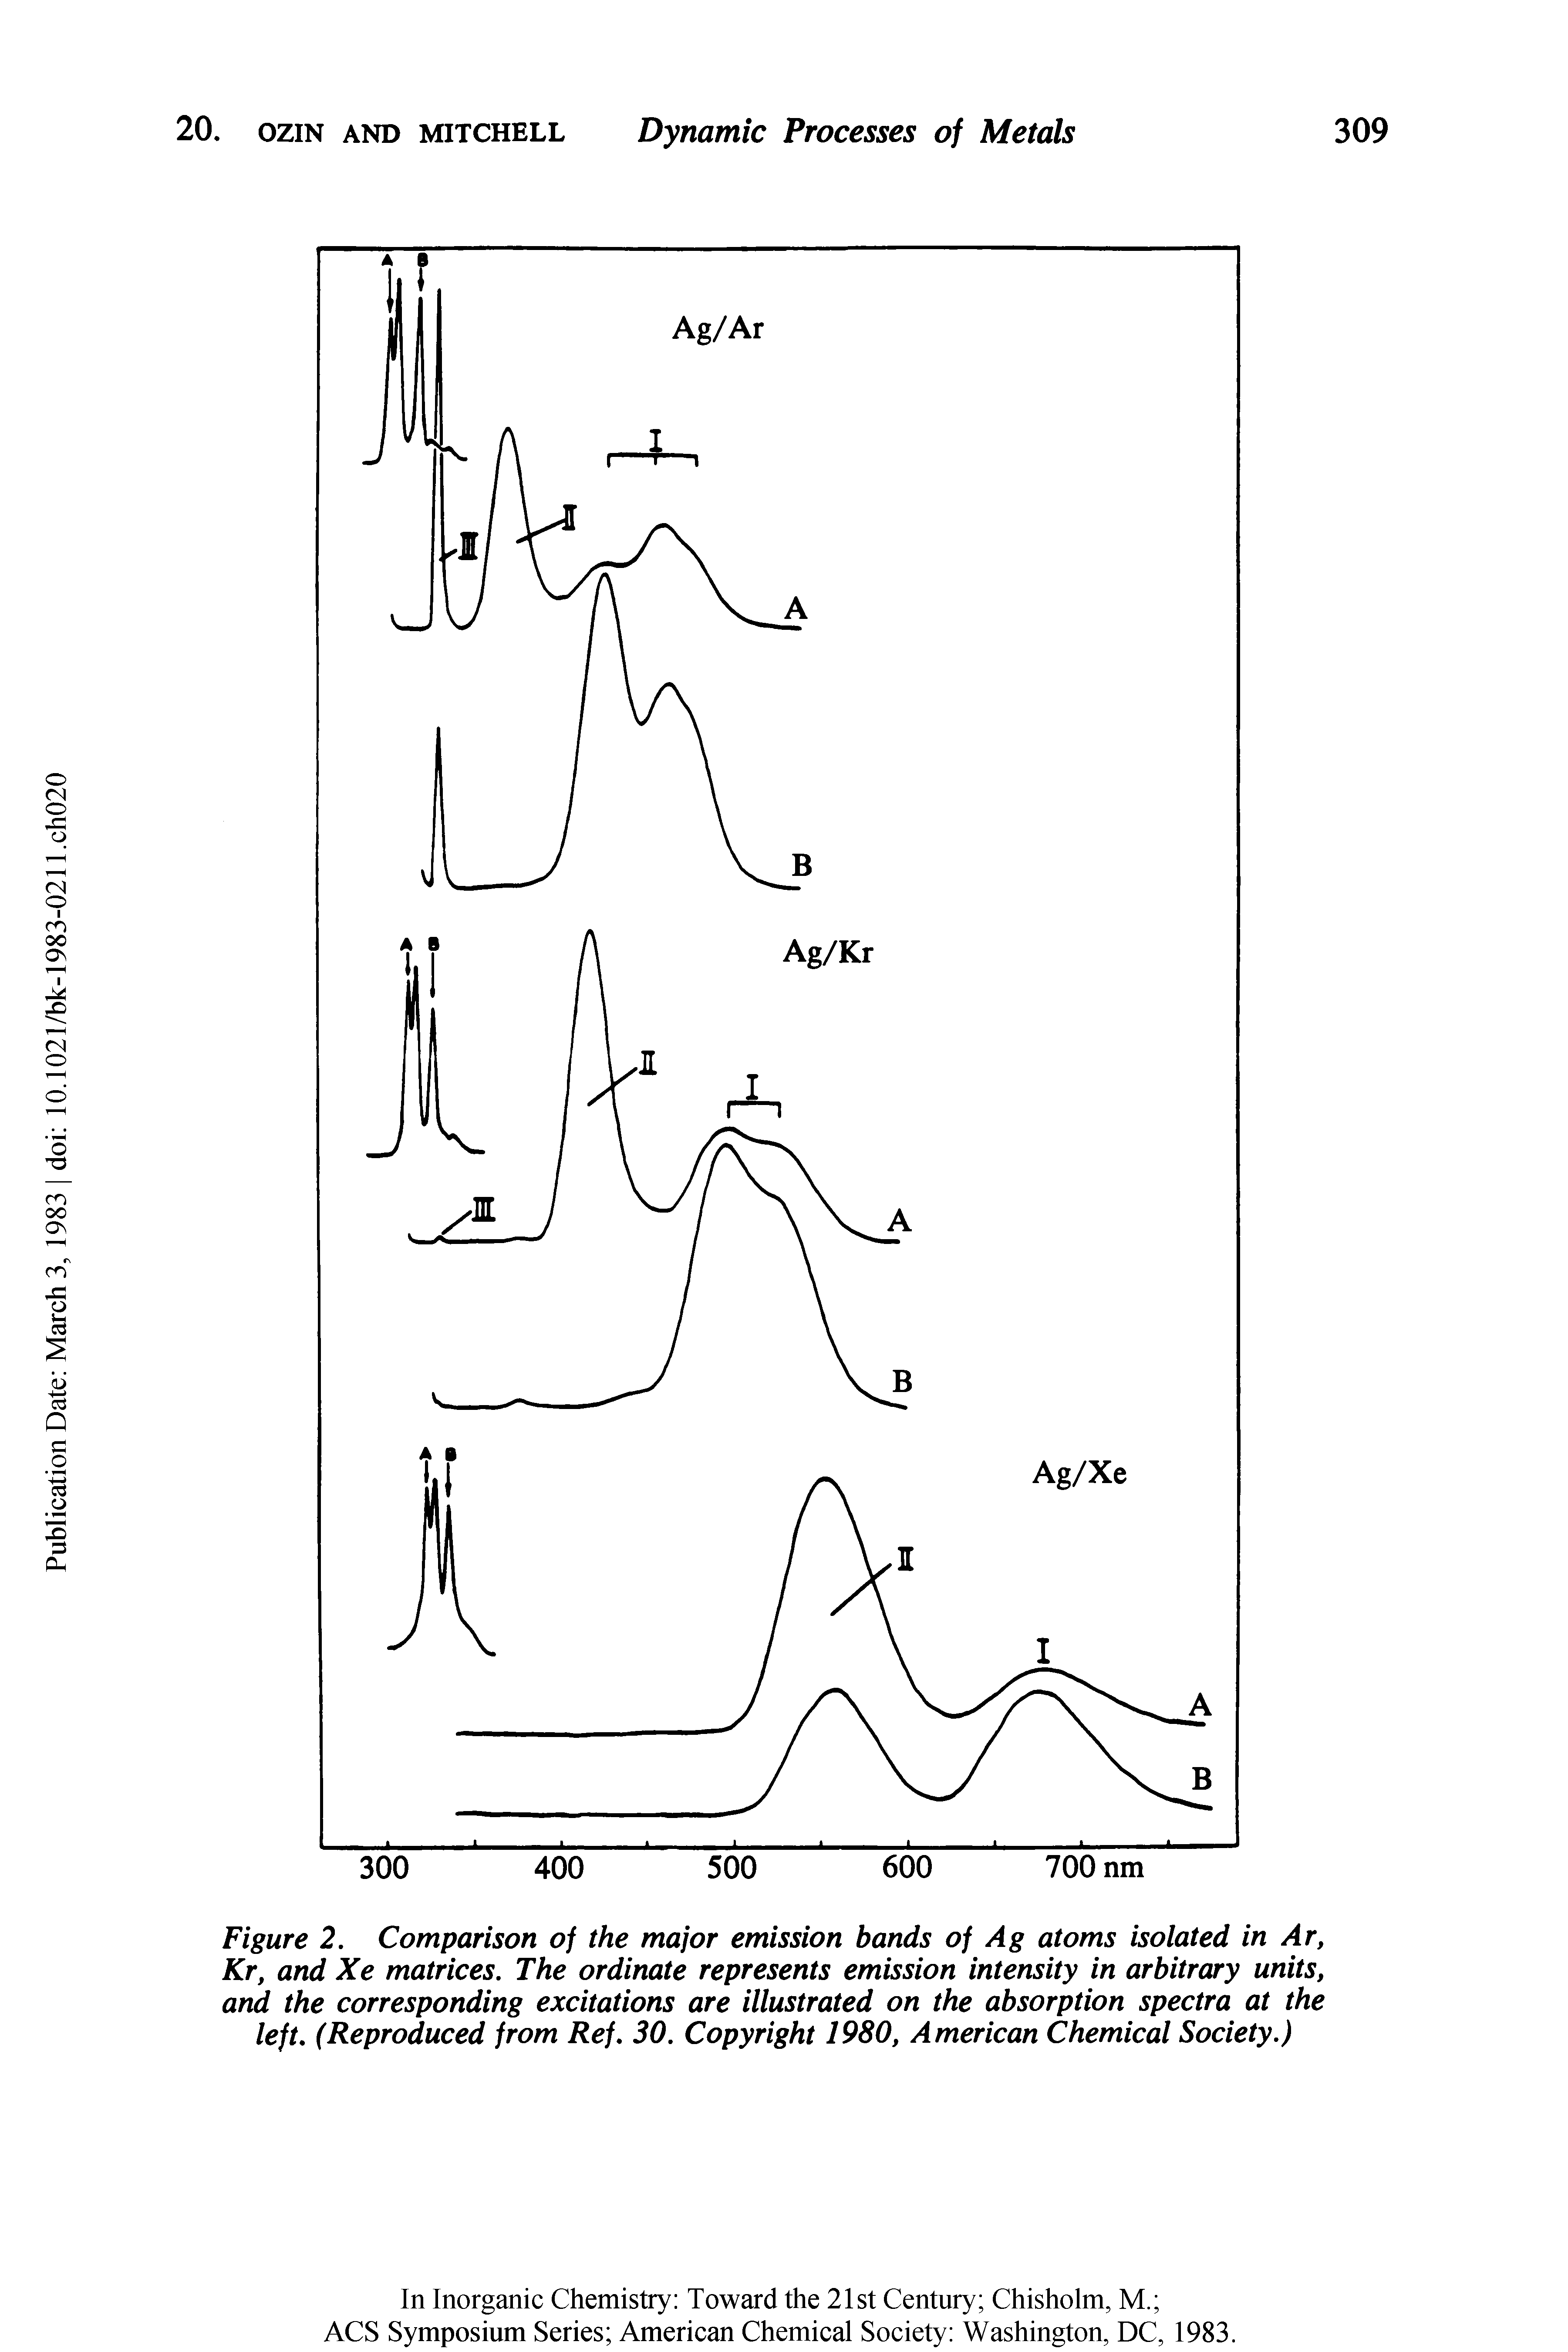 Figure 2. Comparison of the major emission bands of Ag atoms isolated in Ar, Kr, and Xe matrices. The ordinate represents emission intensity in arbitrary units, and the corresponding excitations are illustrated on the absorption spectra at the left. (Reproduced from Ref. 30. Copyright 1980, American Chemical Society.)...